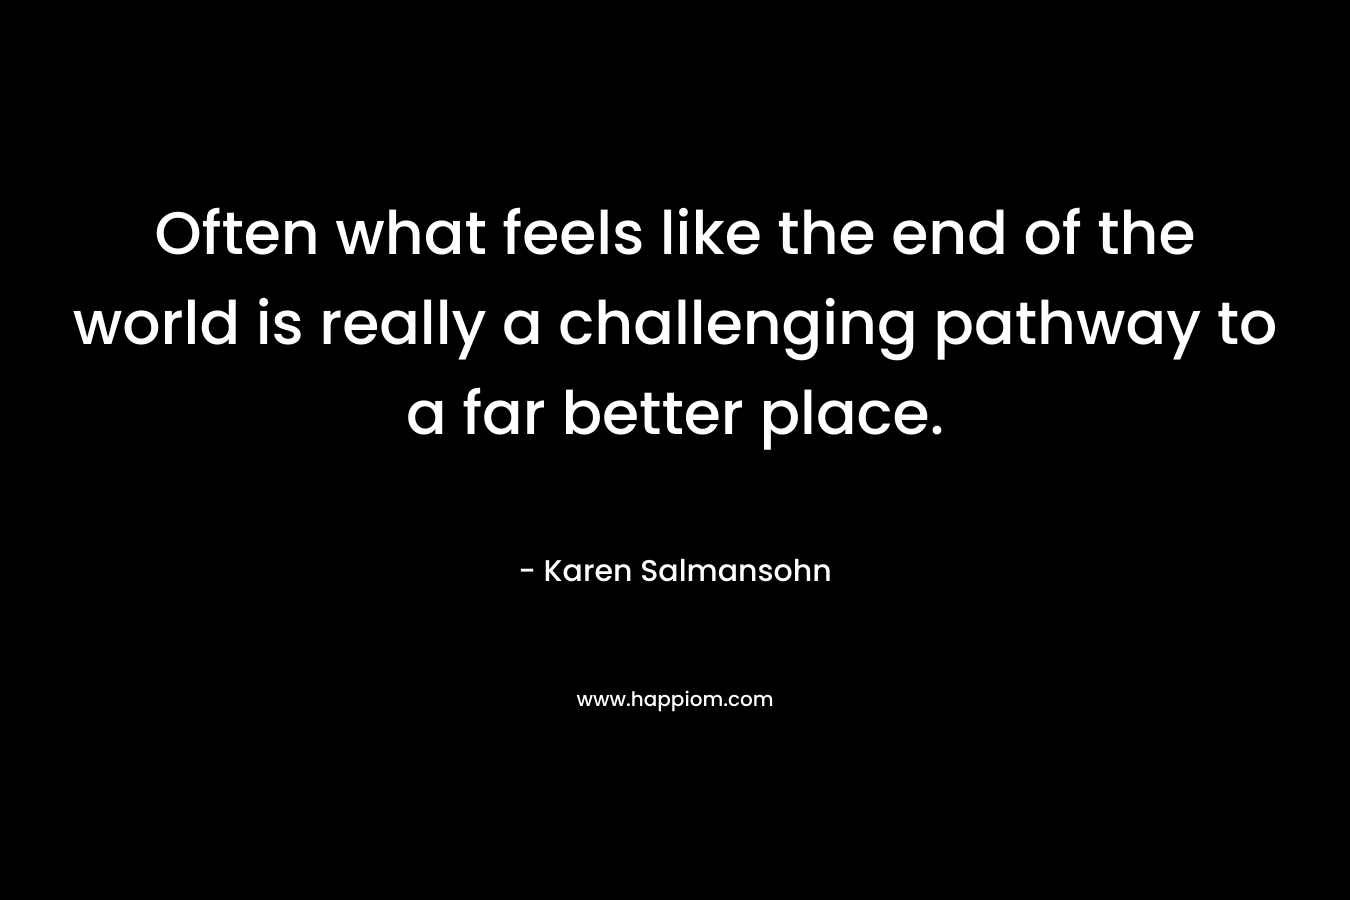 Often what feels like the end of the world is really a challenging pathway to a far better place. – Karen Salmansohn